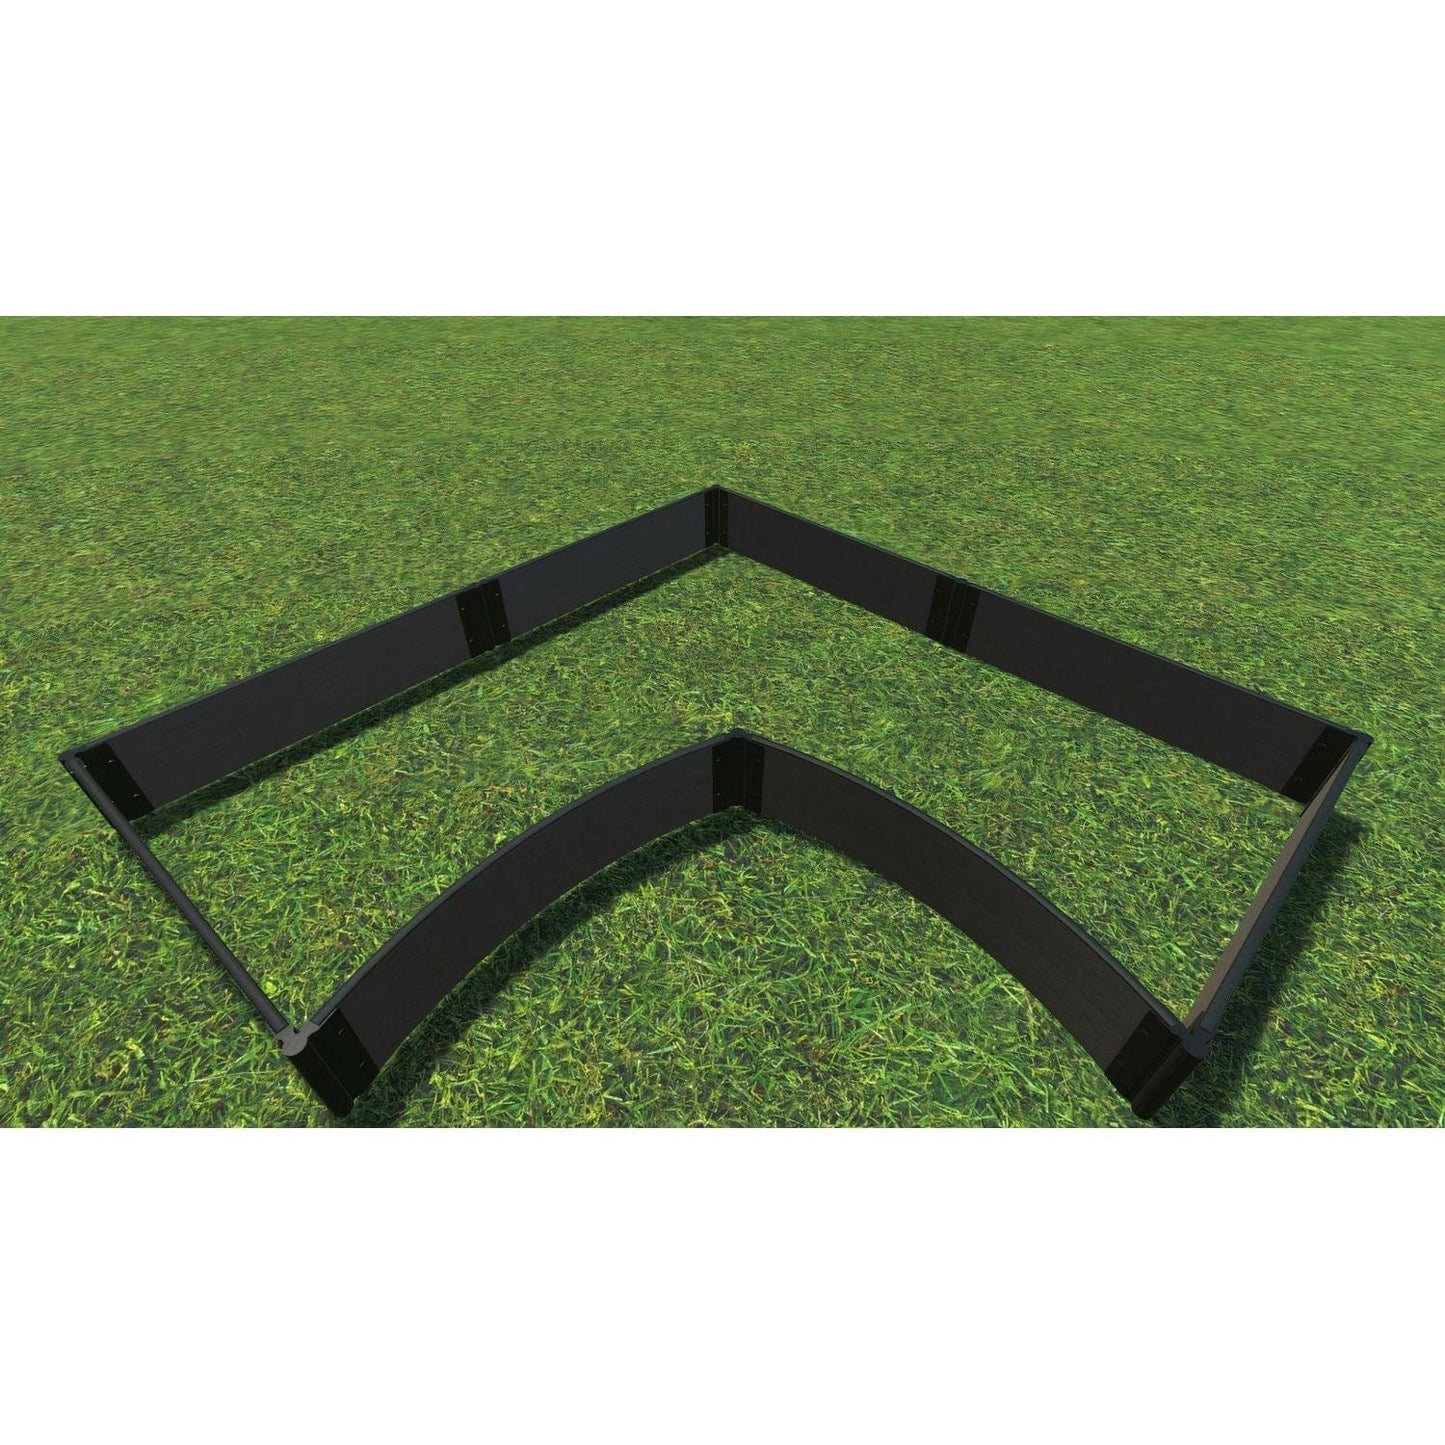 Frame It All Gardening Accessories Frame It All | Tool-Free Grand Concourse Interior Curved Corner Raised Garden Bed 8' X 8' X 11" - Weathered Wood - 1" Profile 800002027